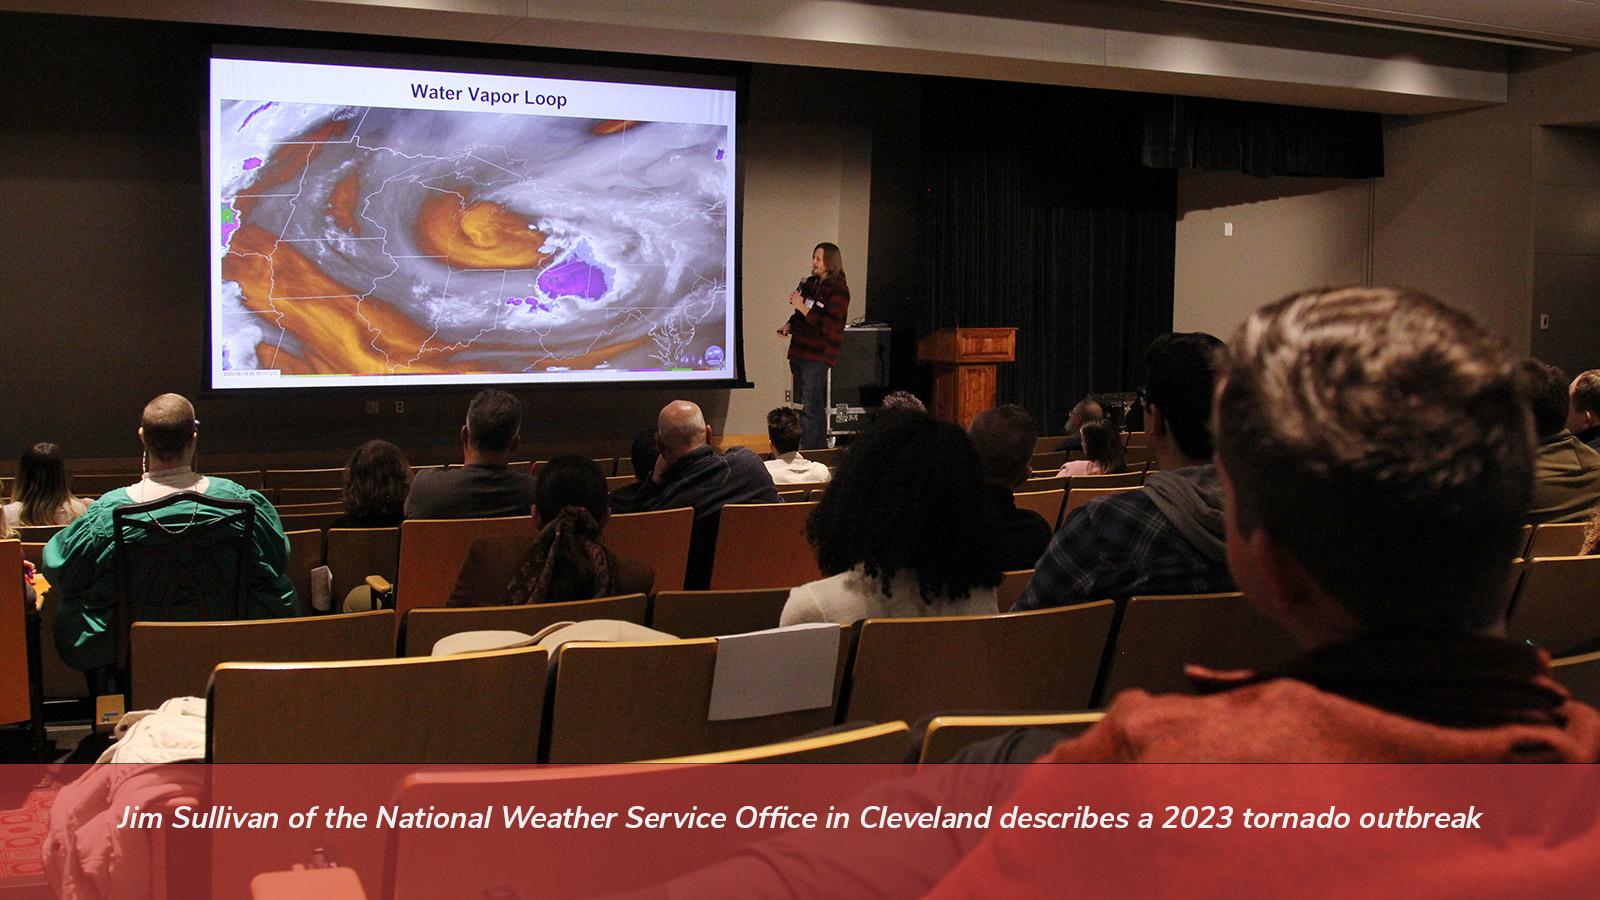 Jim Sullivan of the National Weather Service Office in Cleveland describes a 2023 tornado outbreak